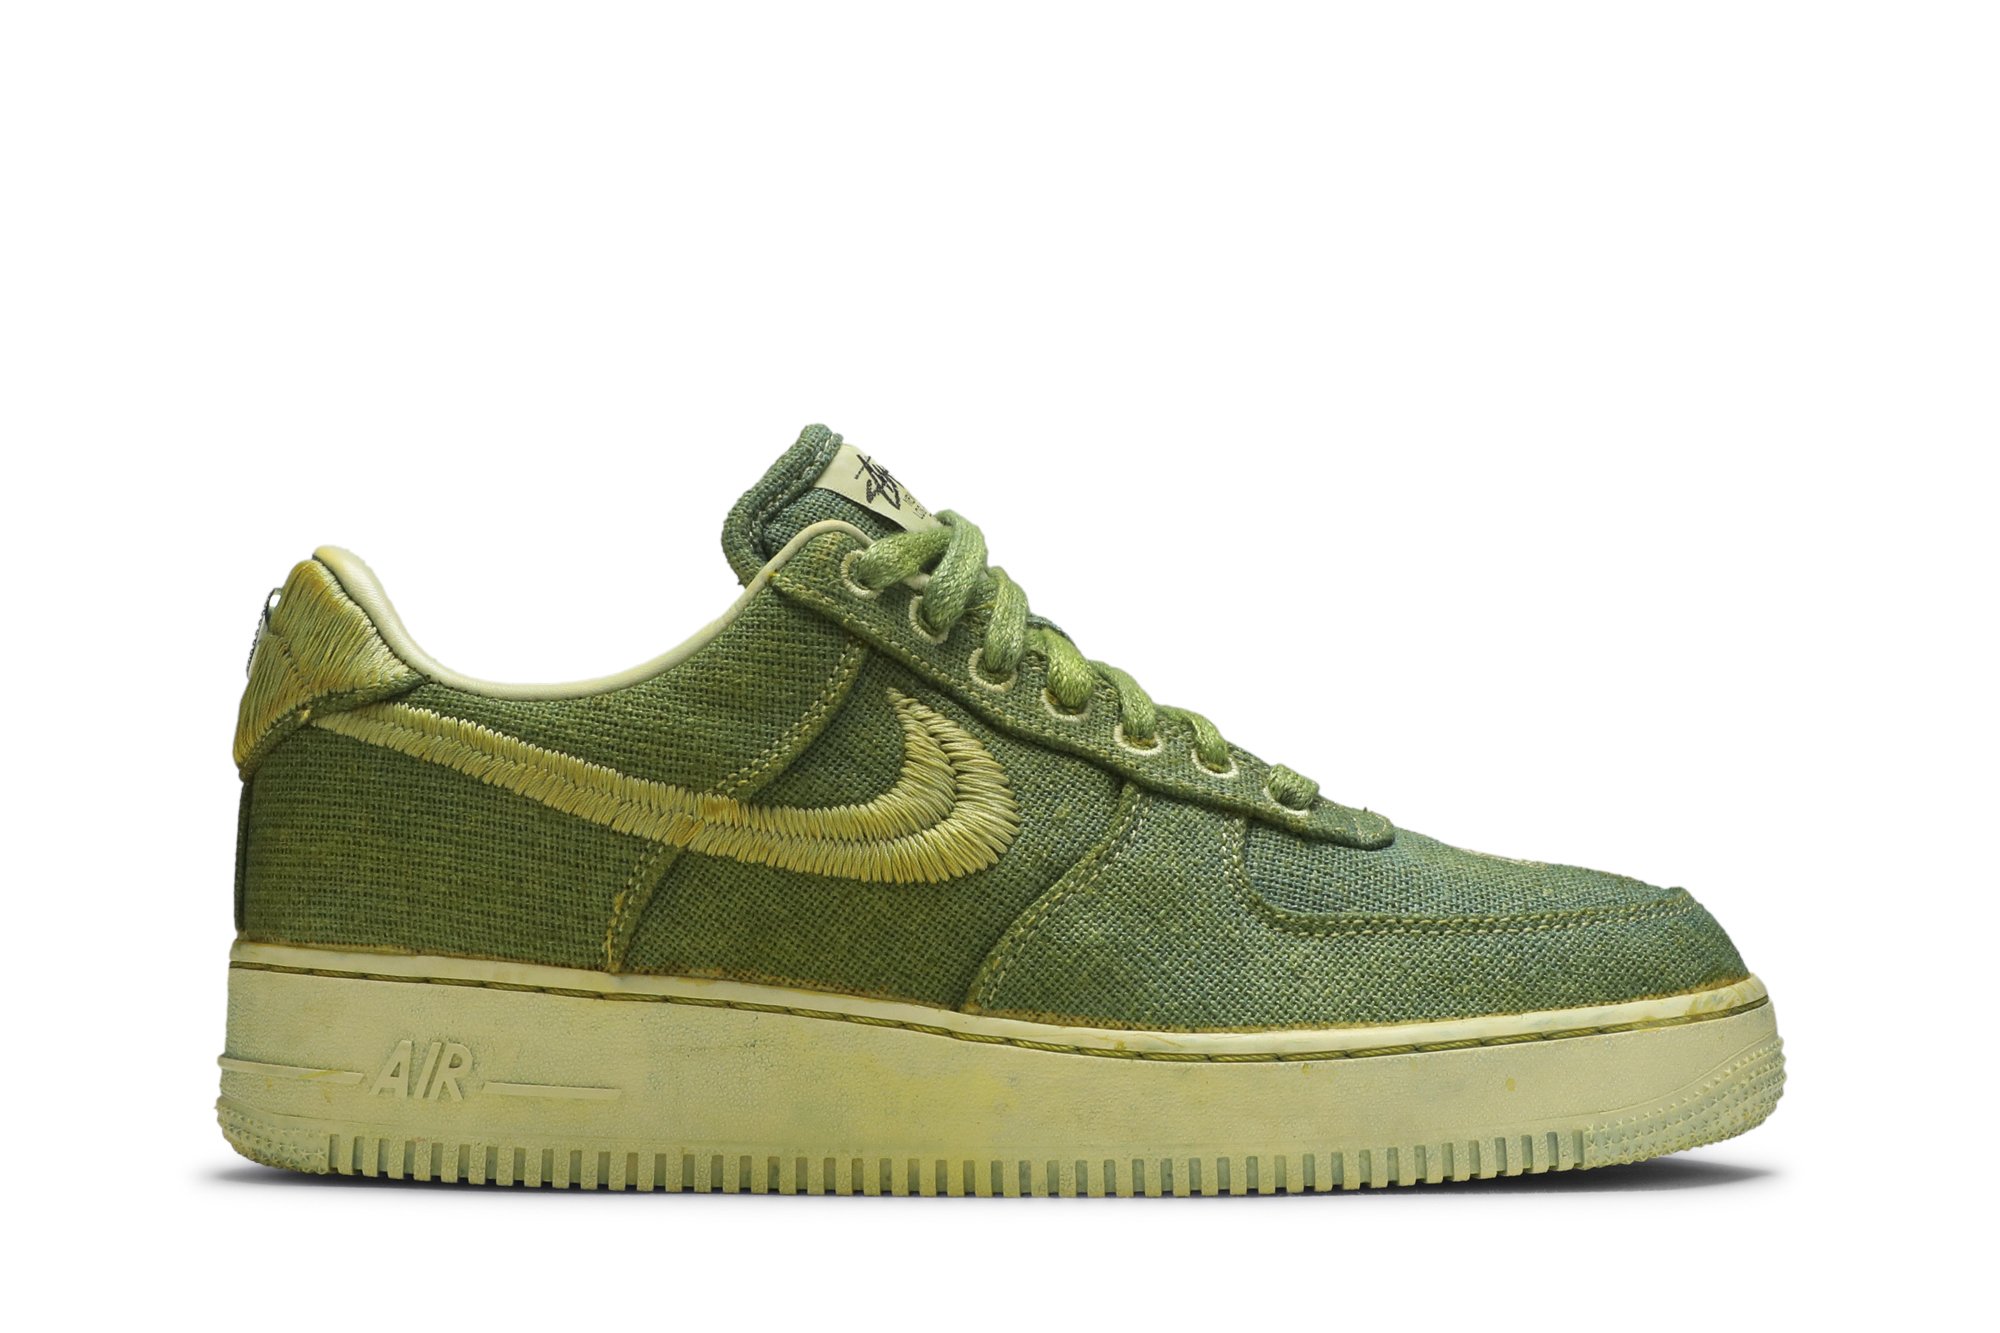 Stussy x Lookout & Wonderland x Air Force 1 Low 'Hand Dyed - London'